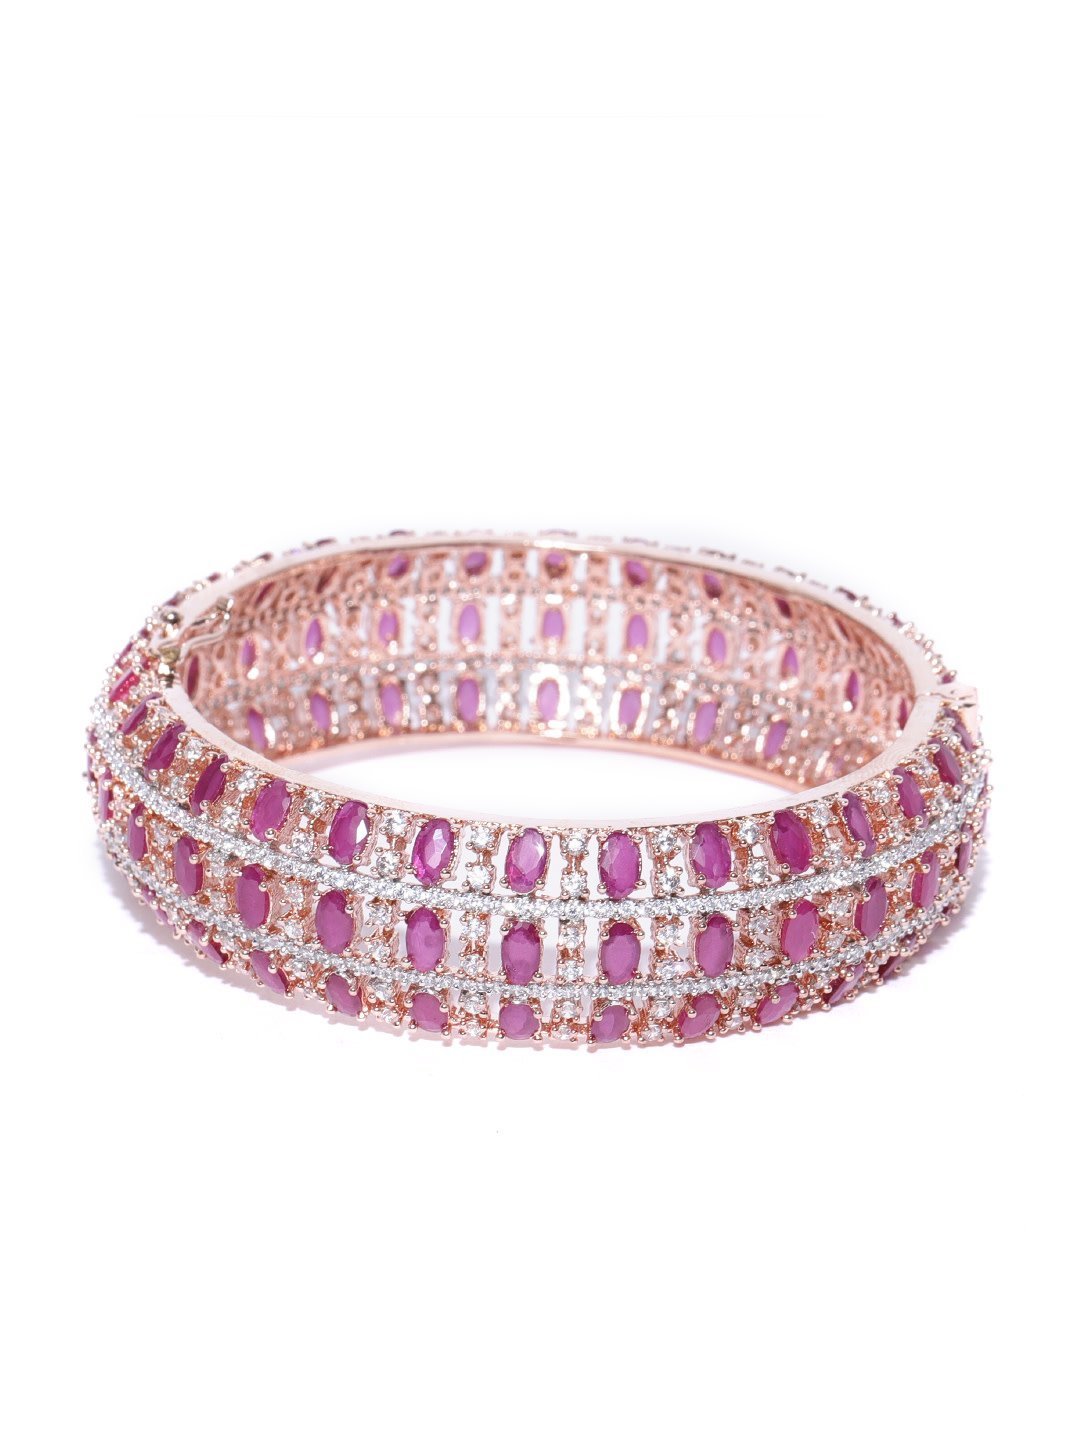 Women's Rose Gold-Plated American Diamond and Ruby Studded Kada Bracelet in Magenta And White Color - Priyaasi